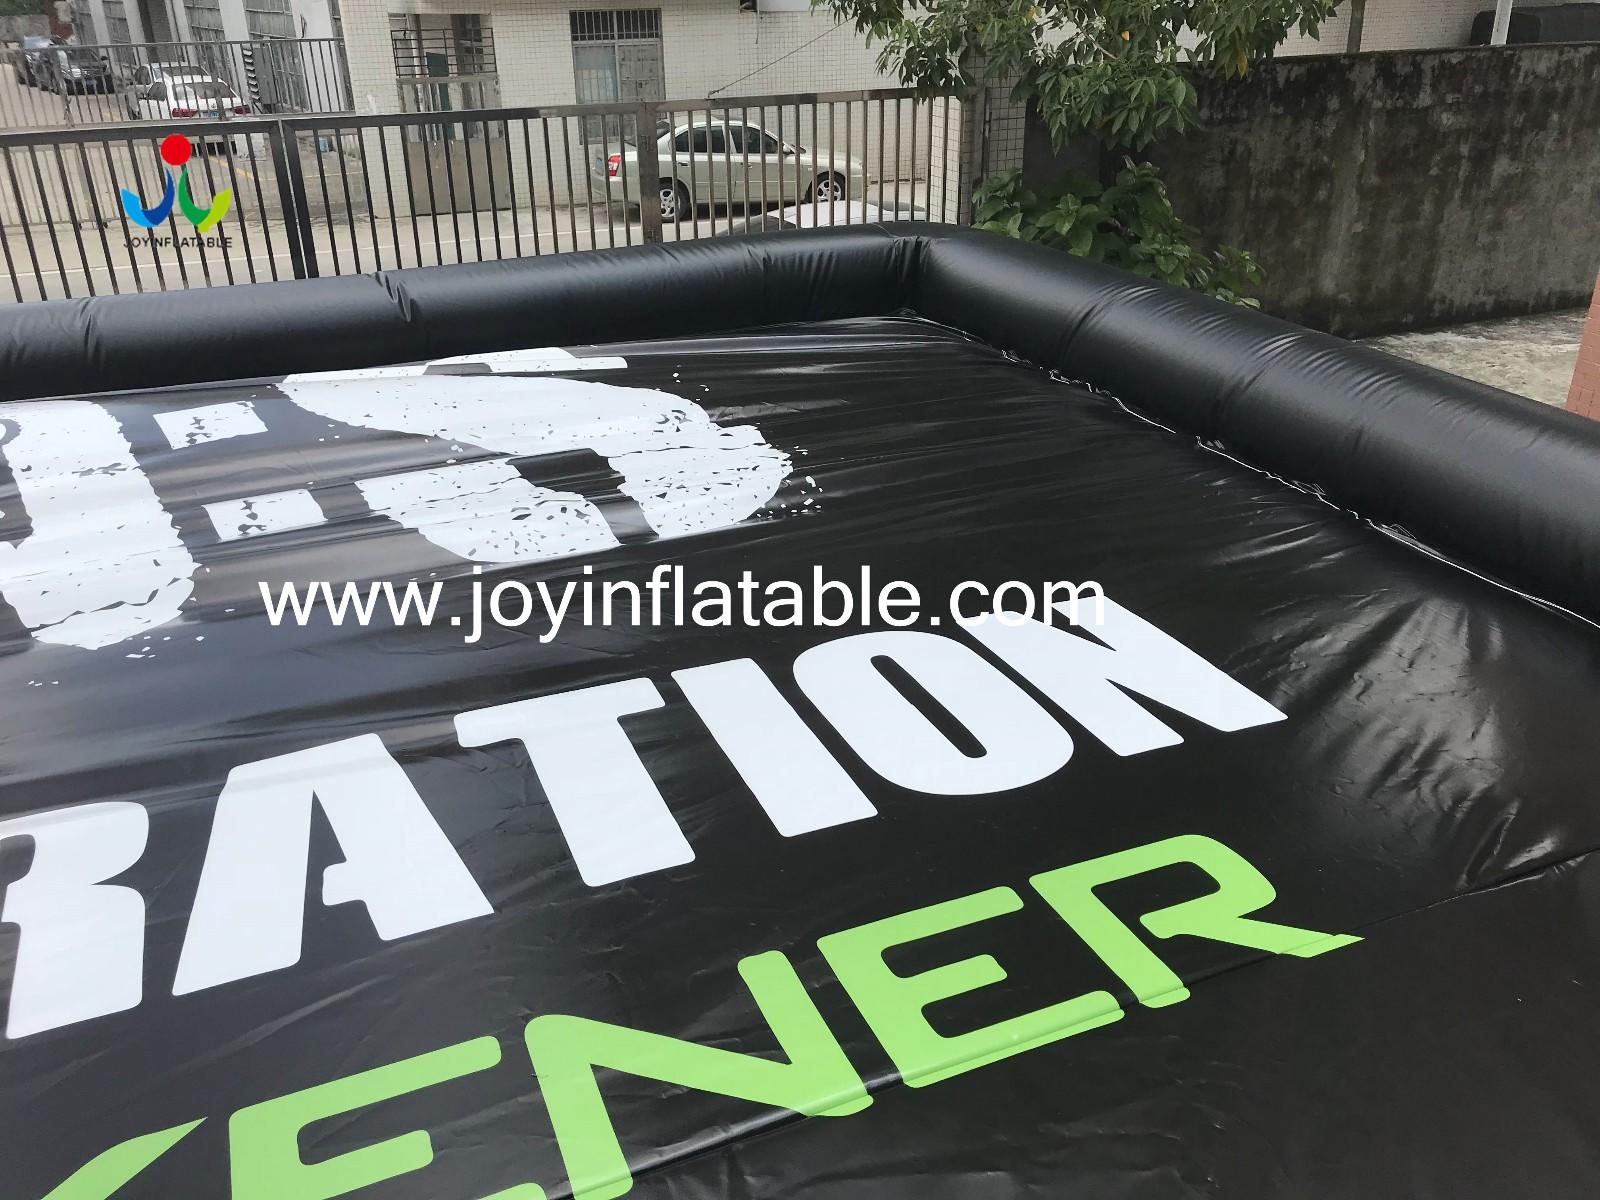 JOY inflatable inflatable air bag series for child